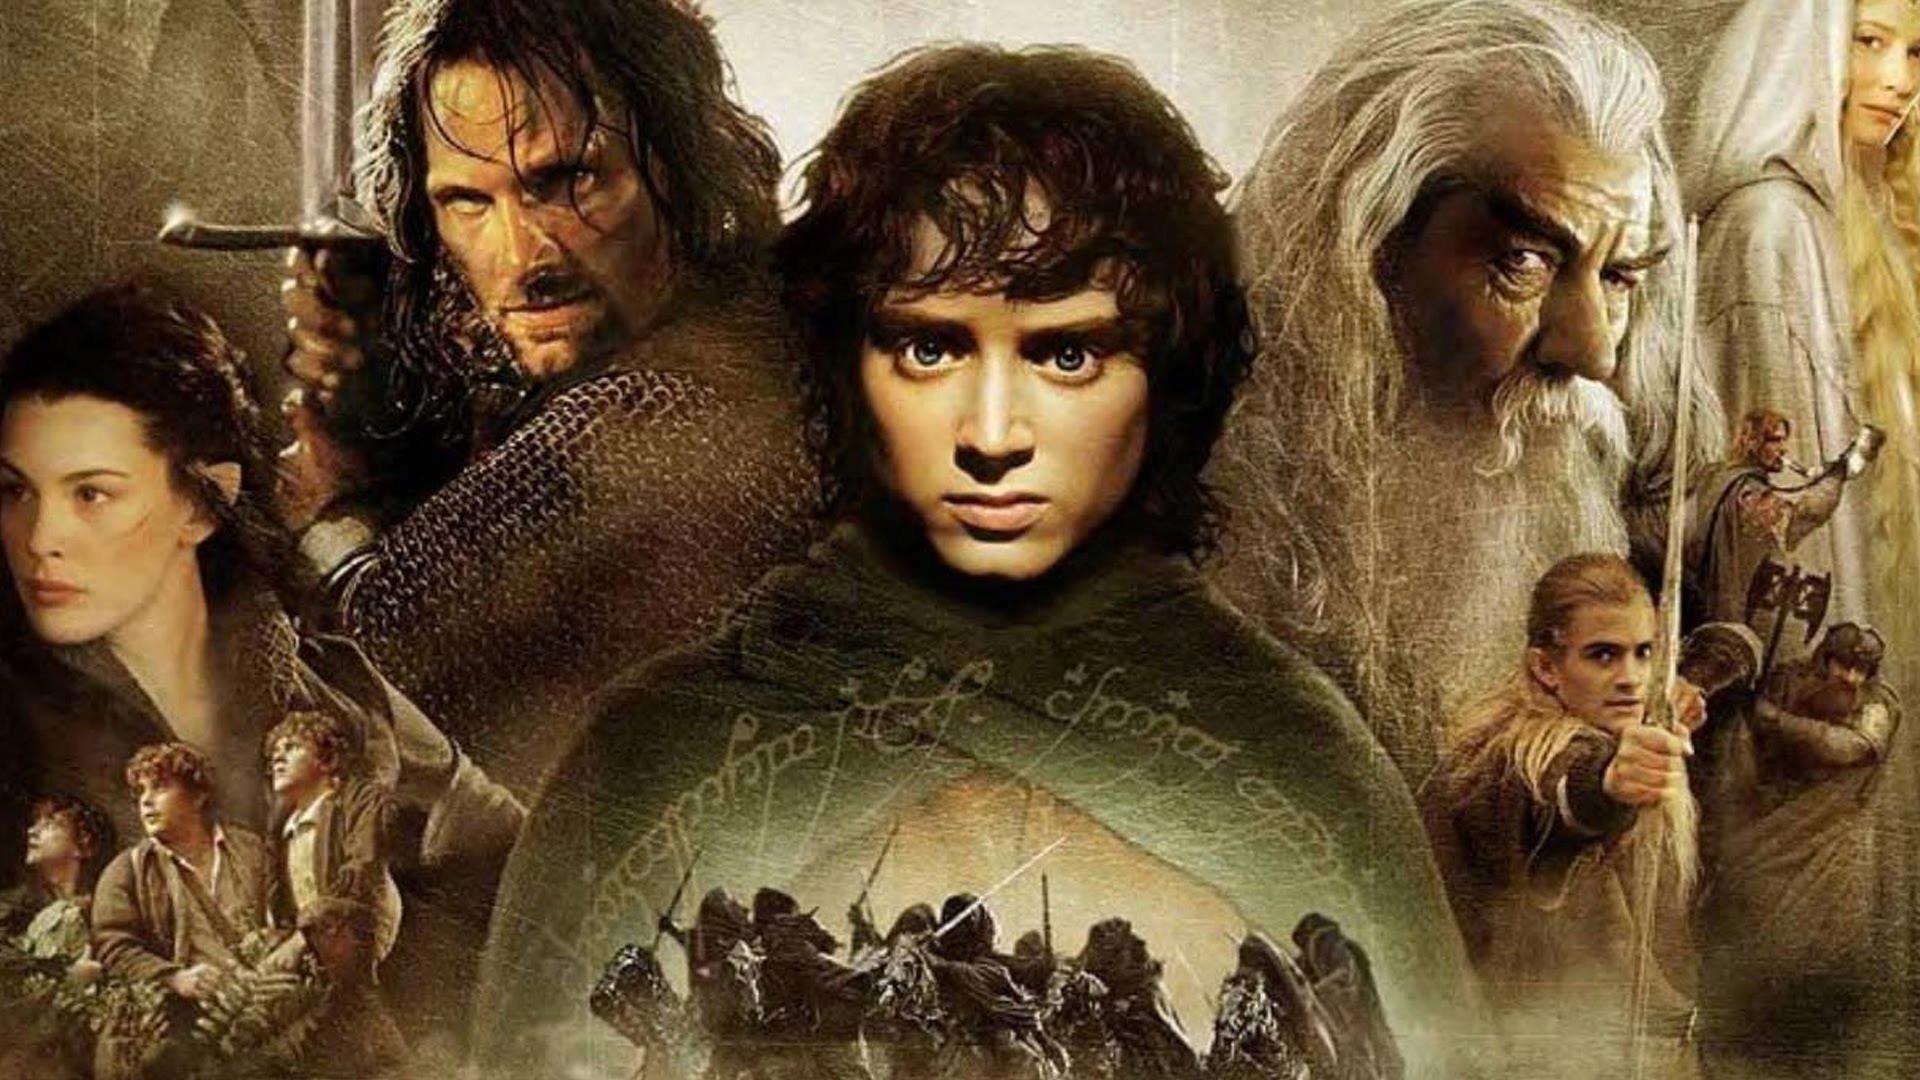 The Music of Lord of the Rings, Royal Festival Hall